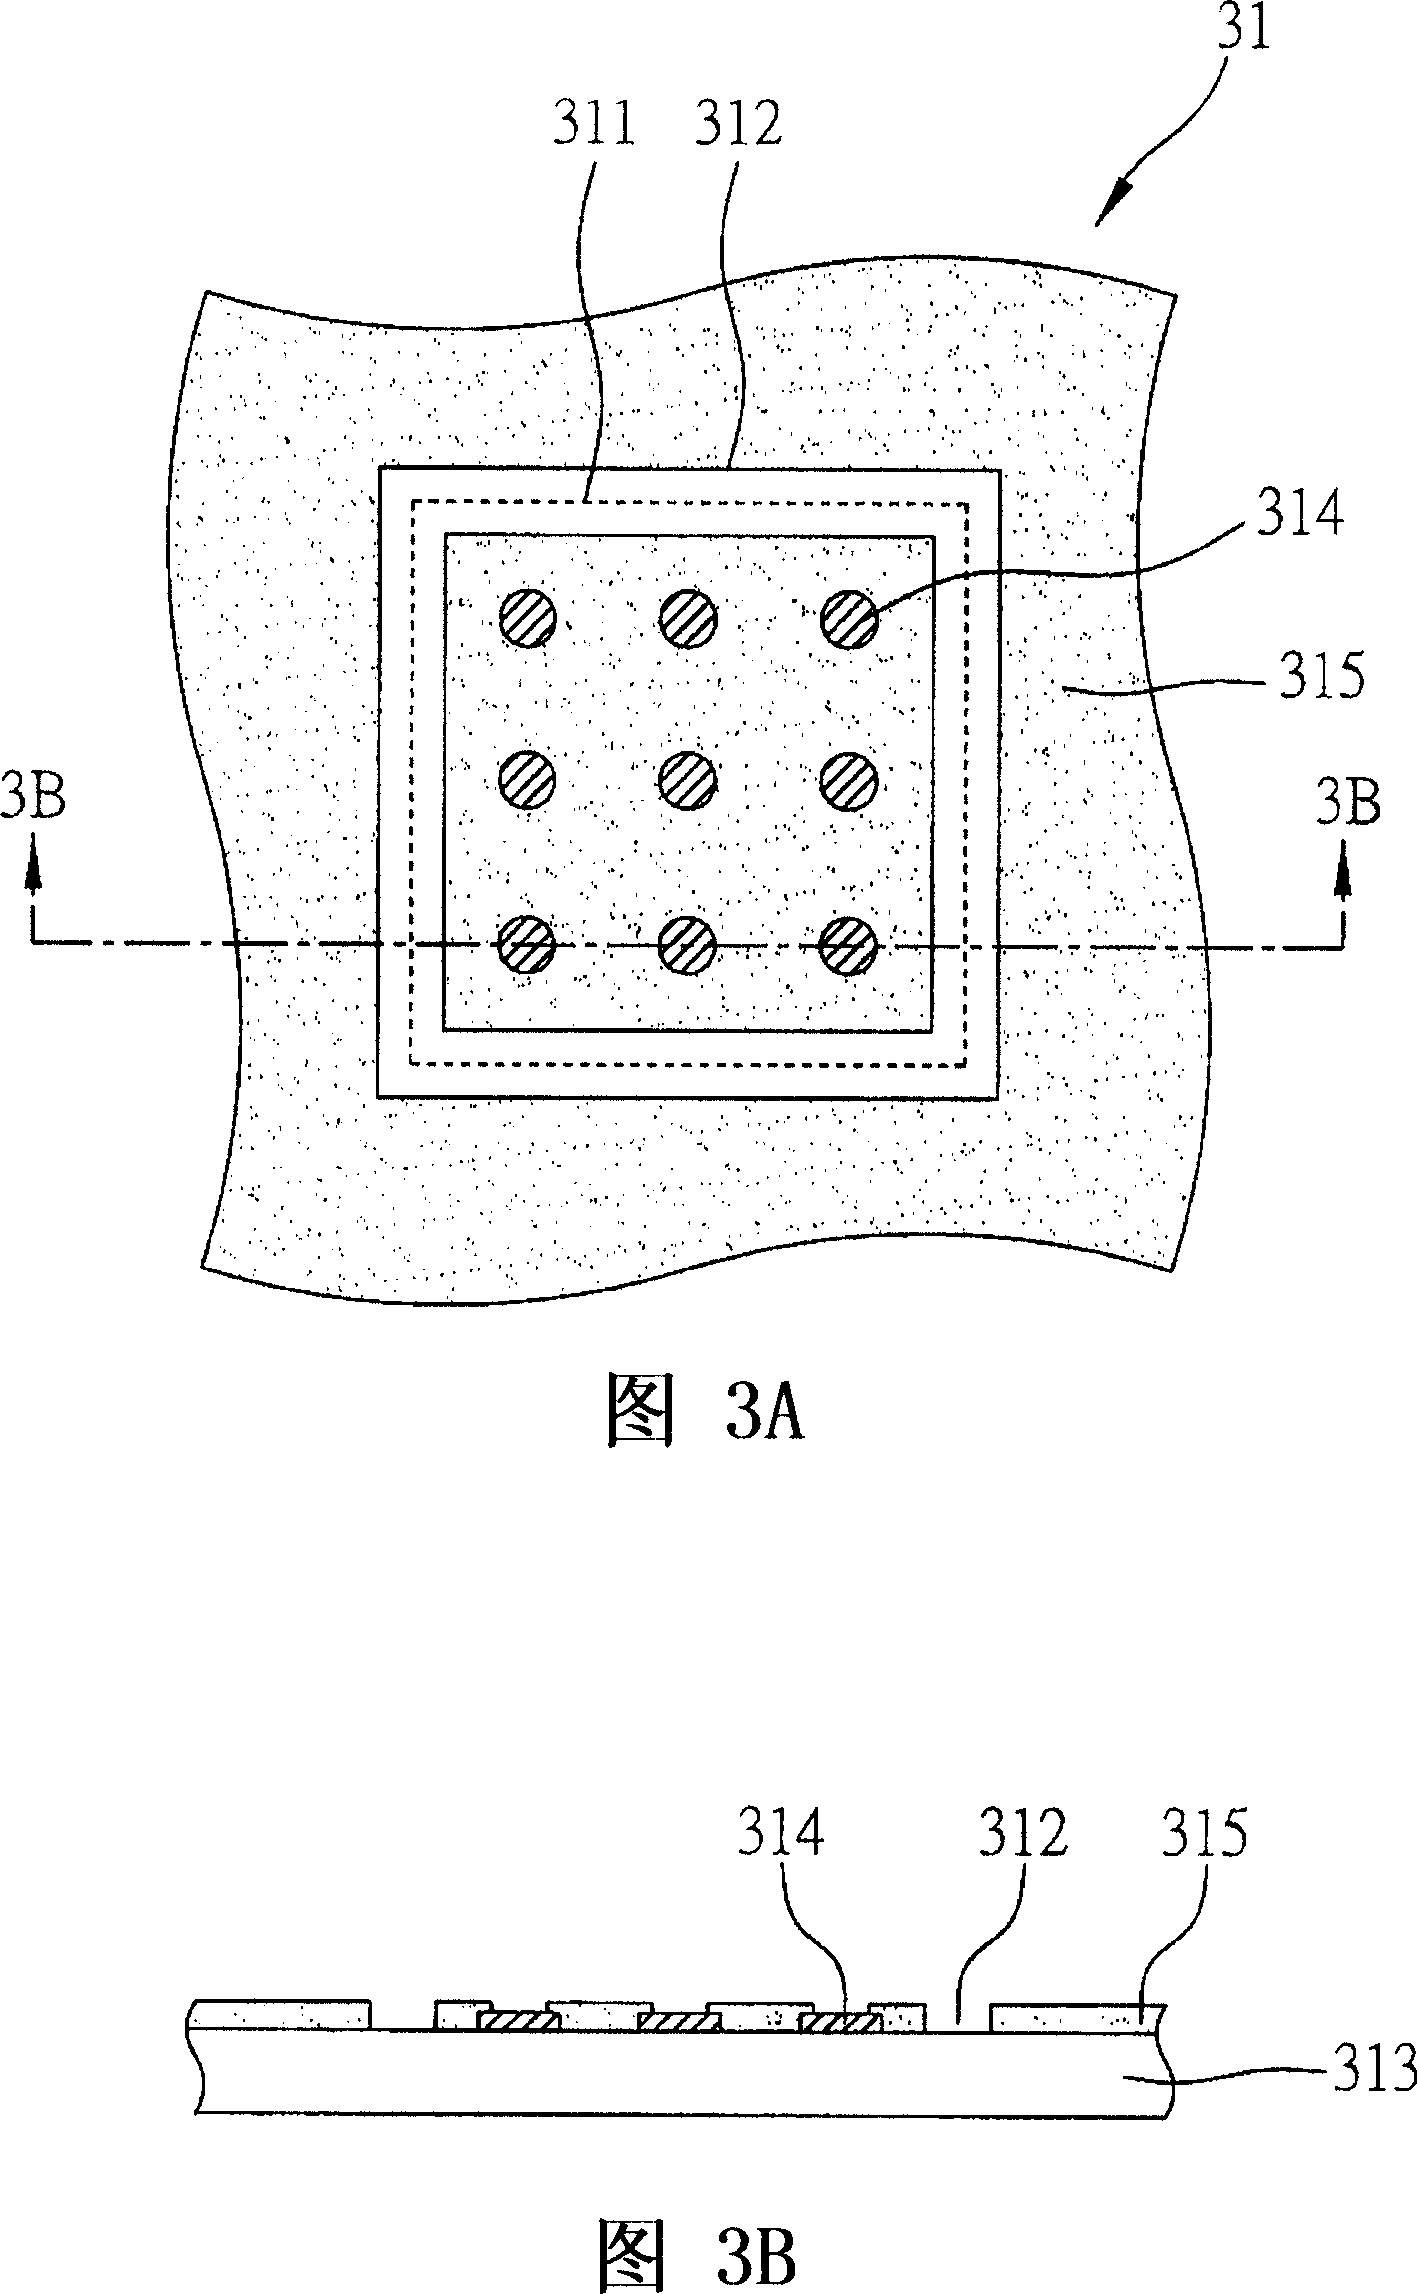 Flip-chip type semiconductor packaging structure and chip bearing member